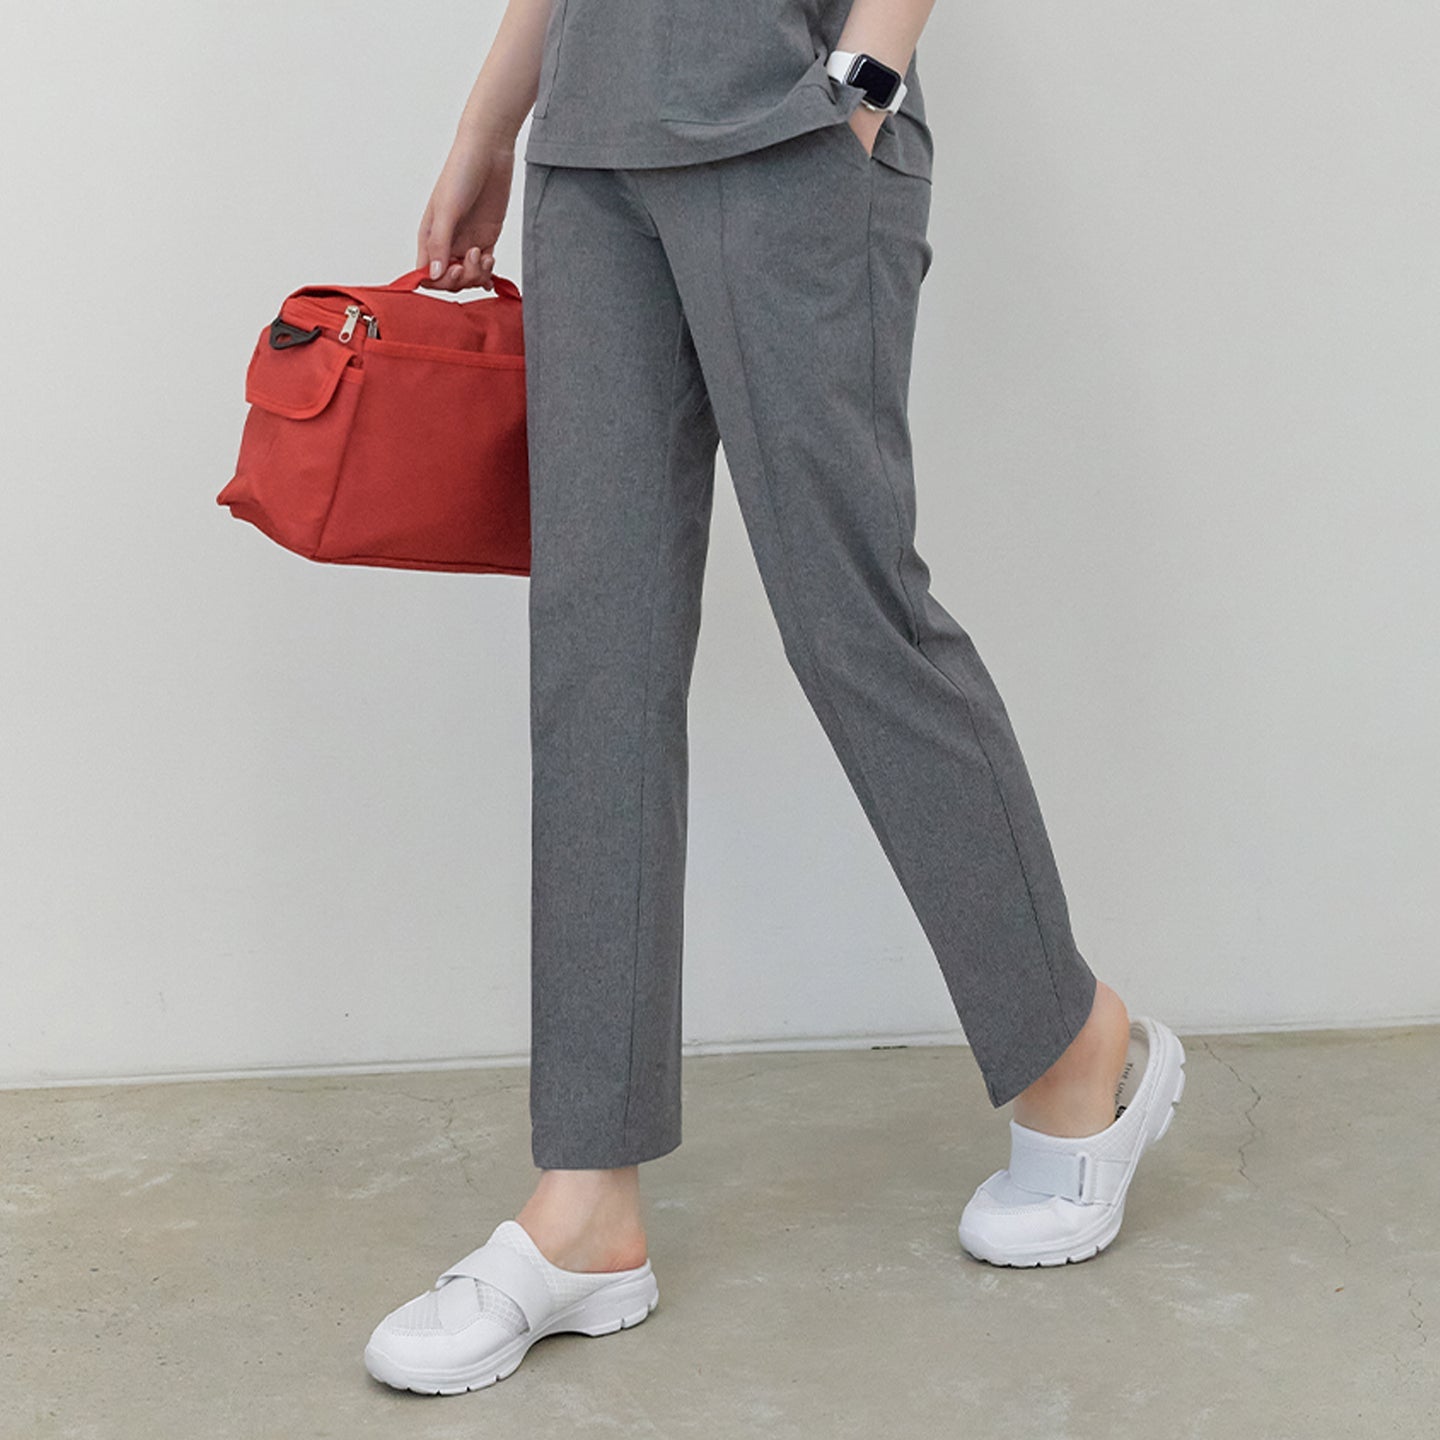 A woman wearing Soft Gray Line Banding Scrub Pants and a matching top, standing with a red bag, showcasing the full side view of the pants,Soft Gray